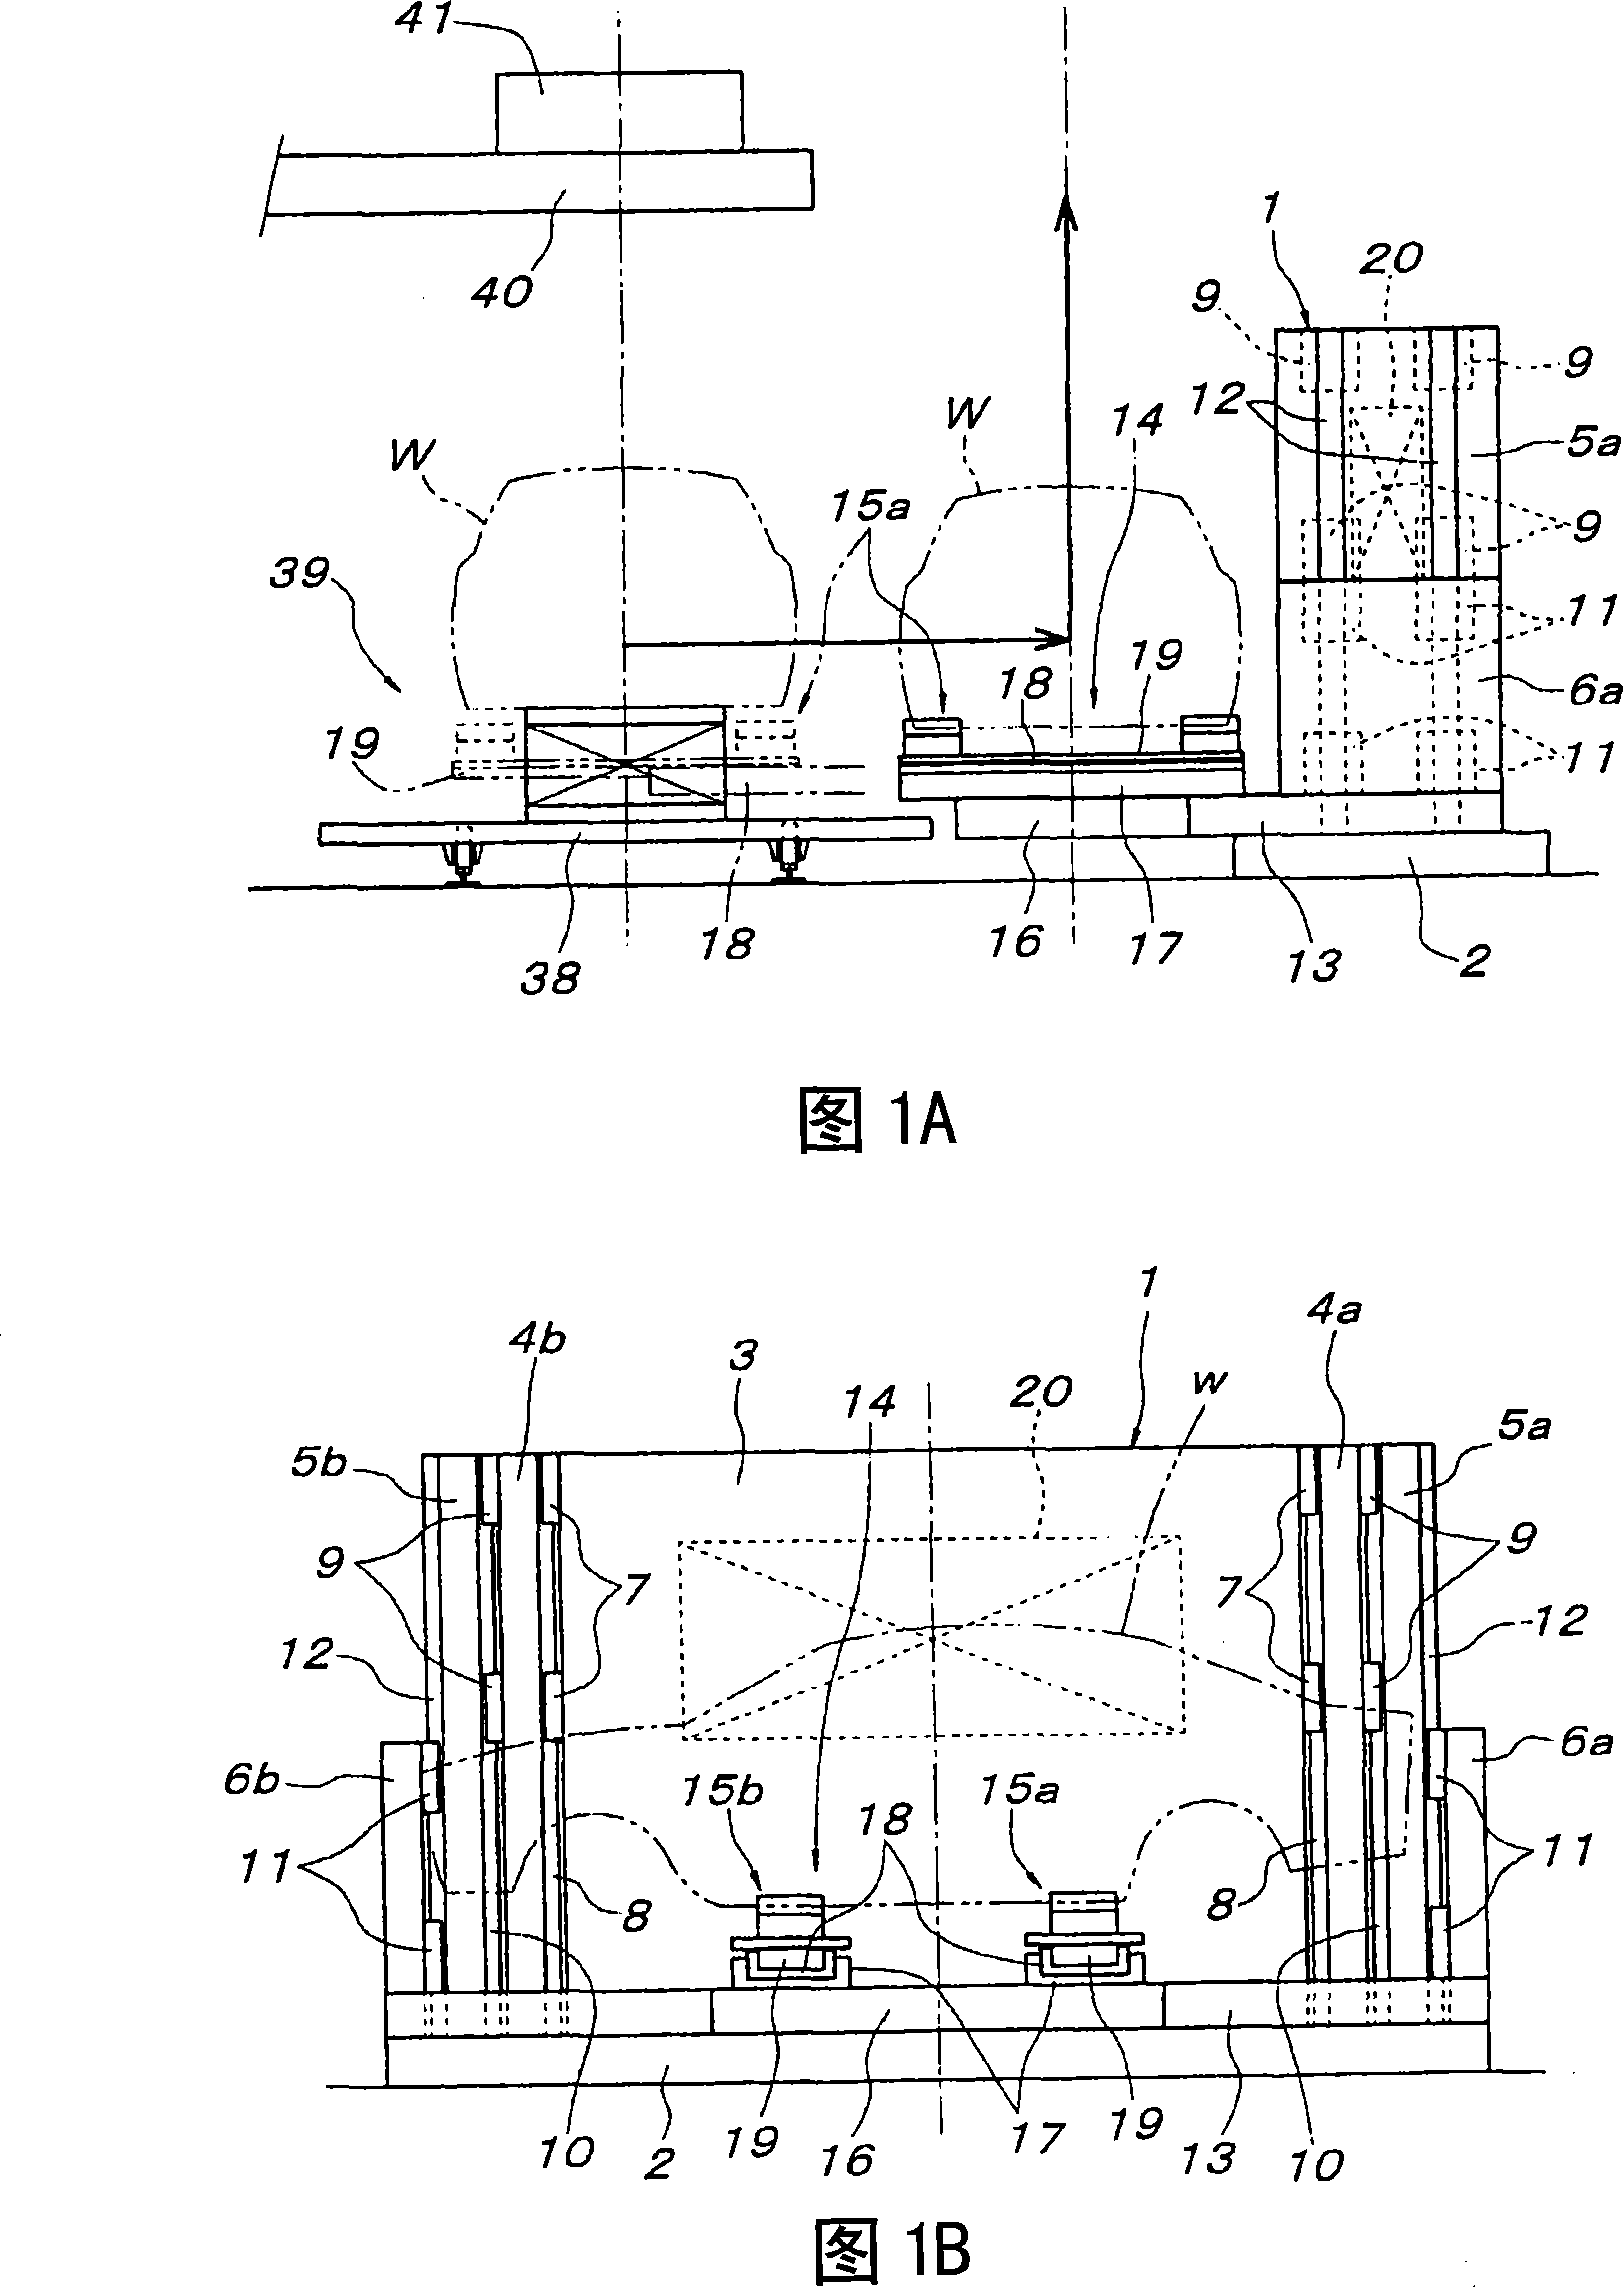 Elevating conveyance device